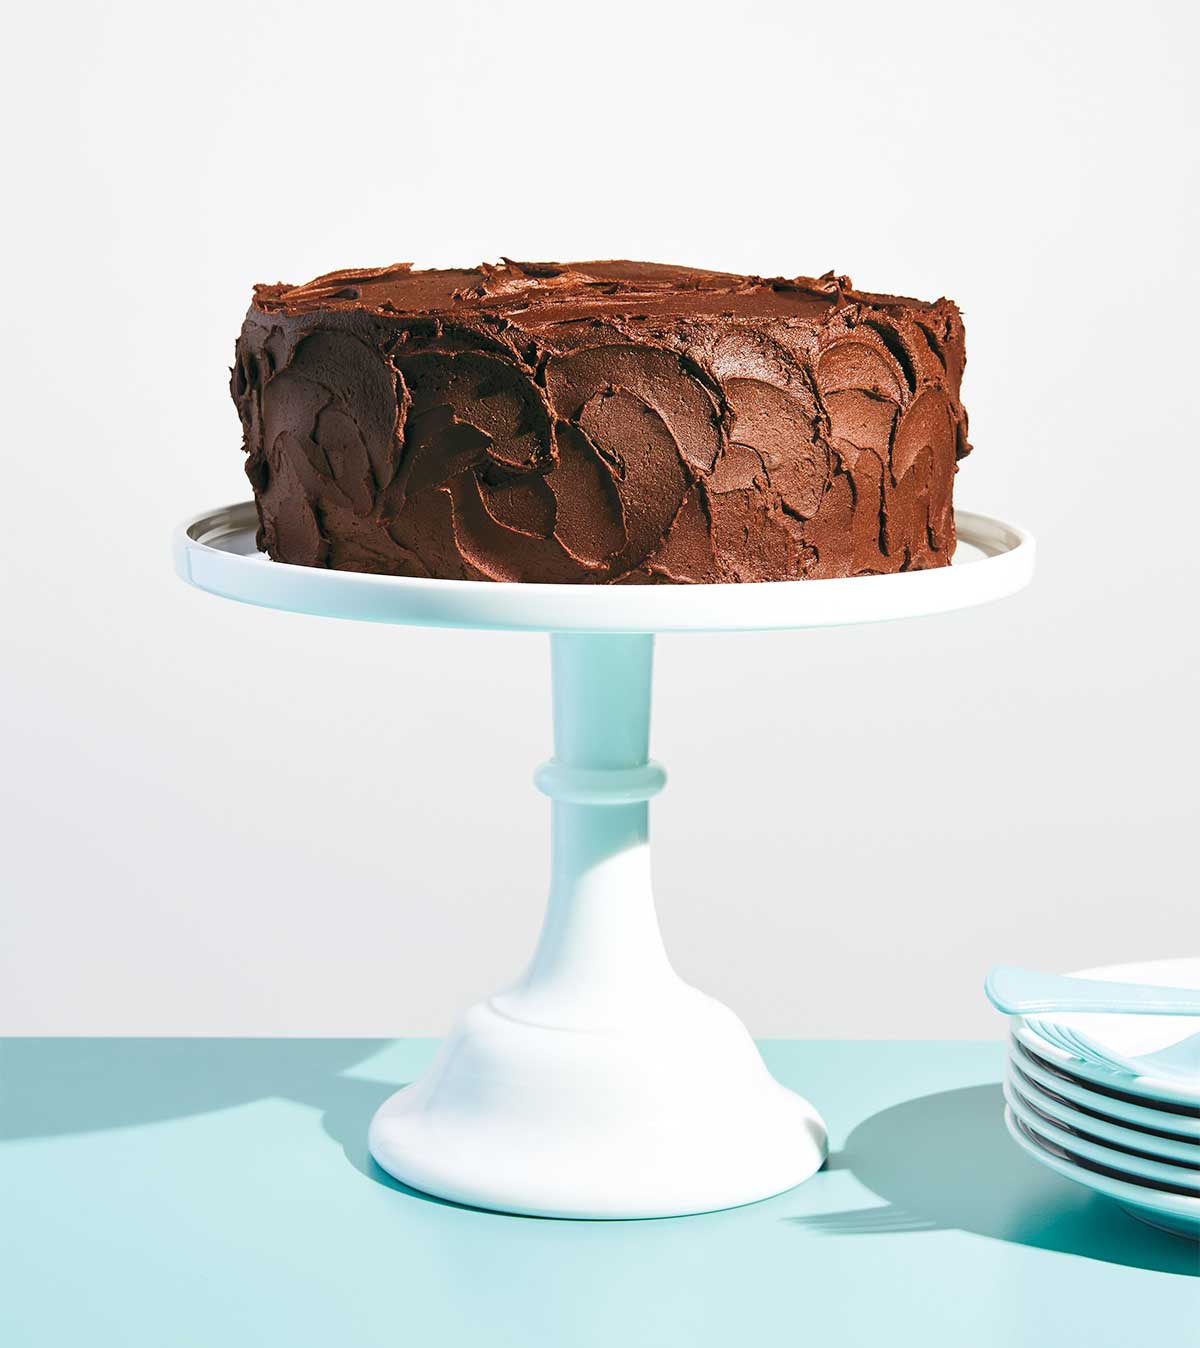 A yellow cake with chocolate frosting on a cake stand with a stack of plates beside it.